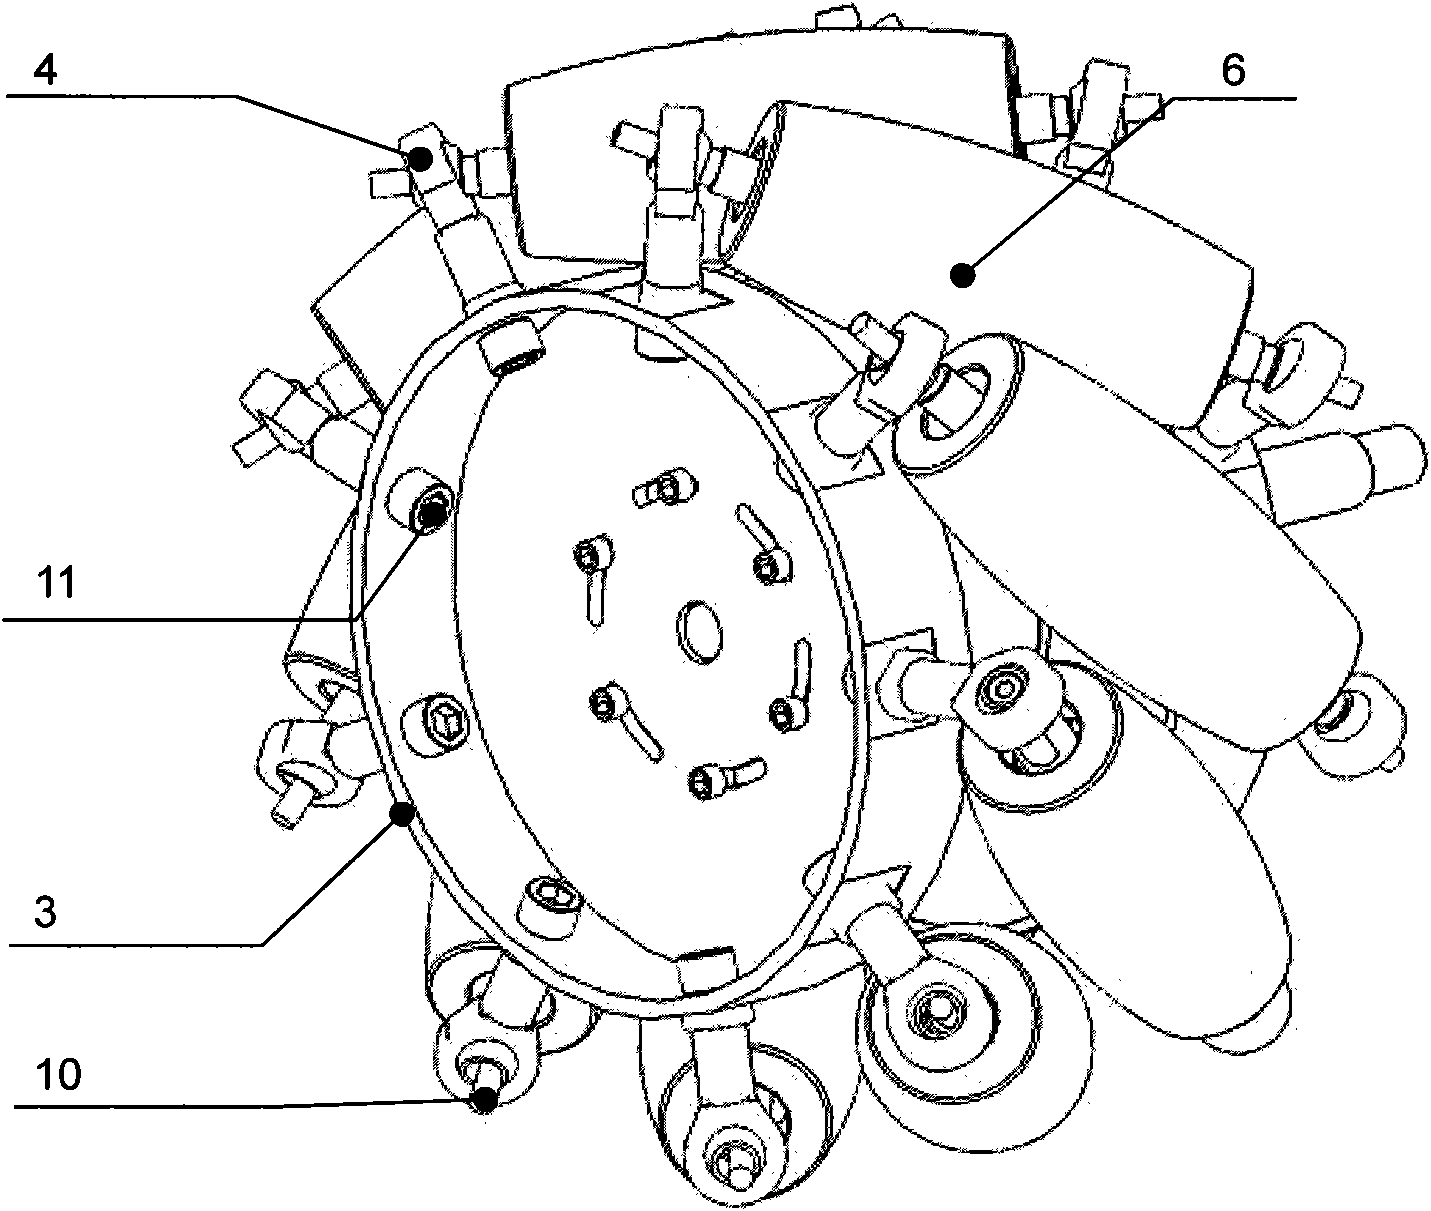 Omnidirectional wheel with simplified manufacturing technique